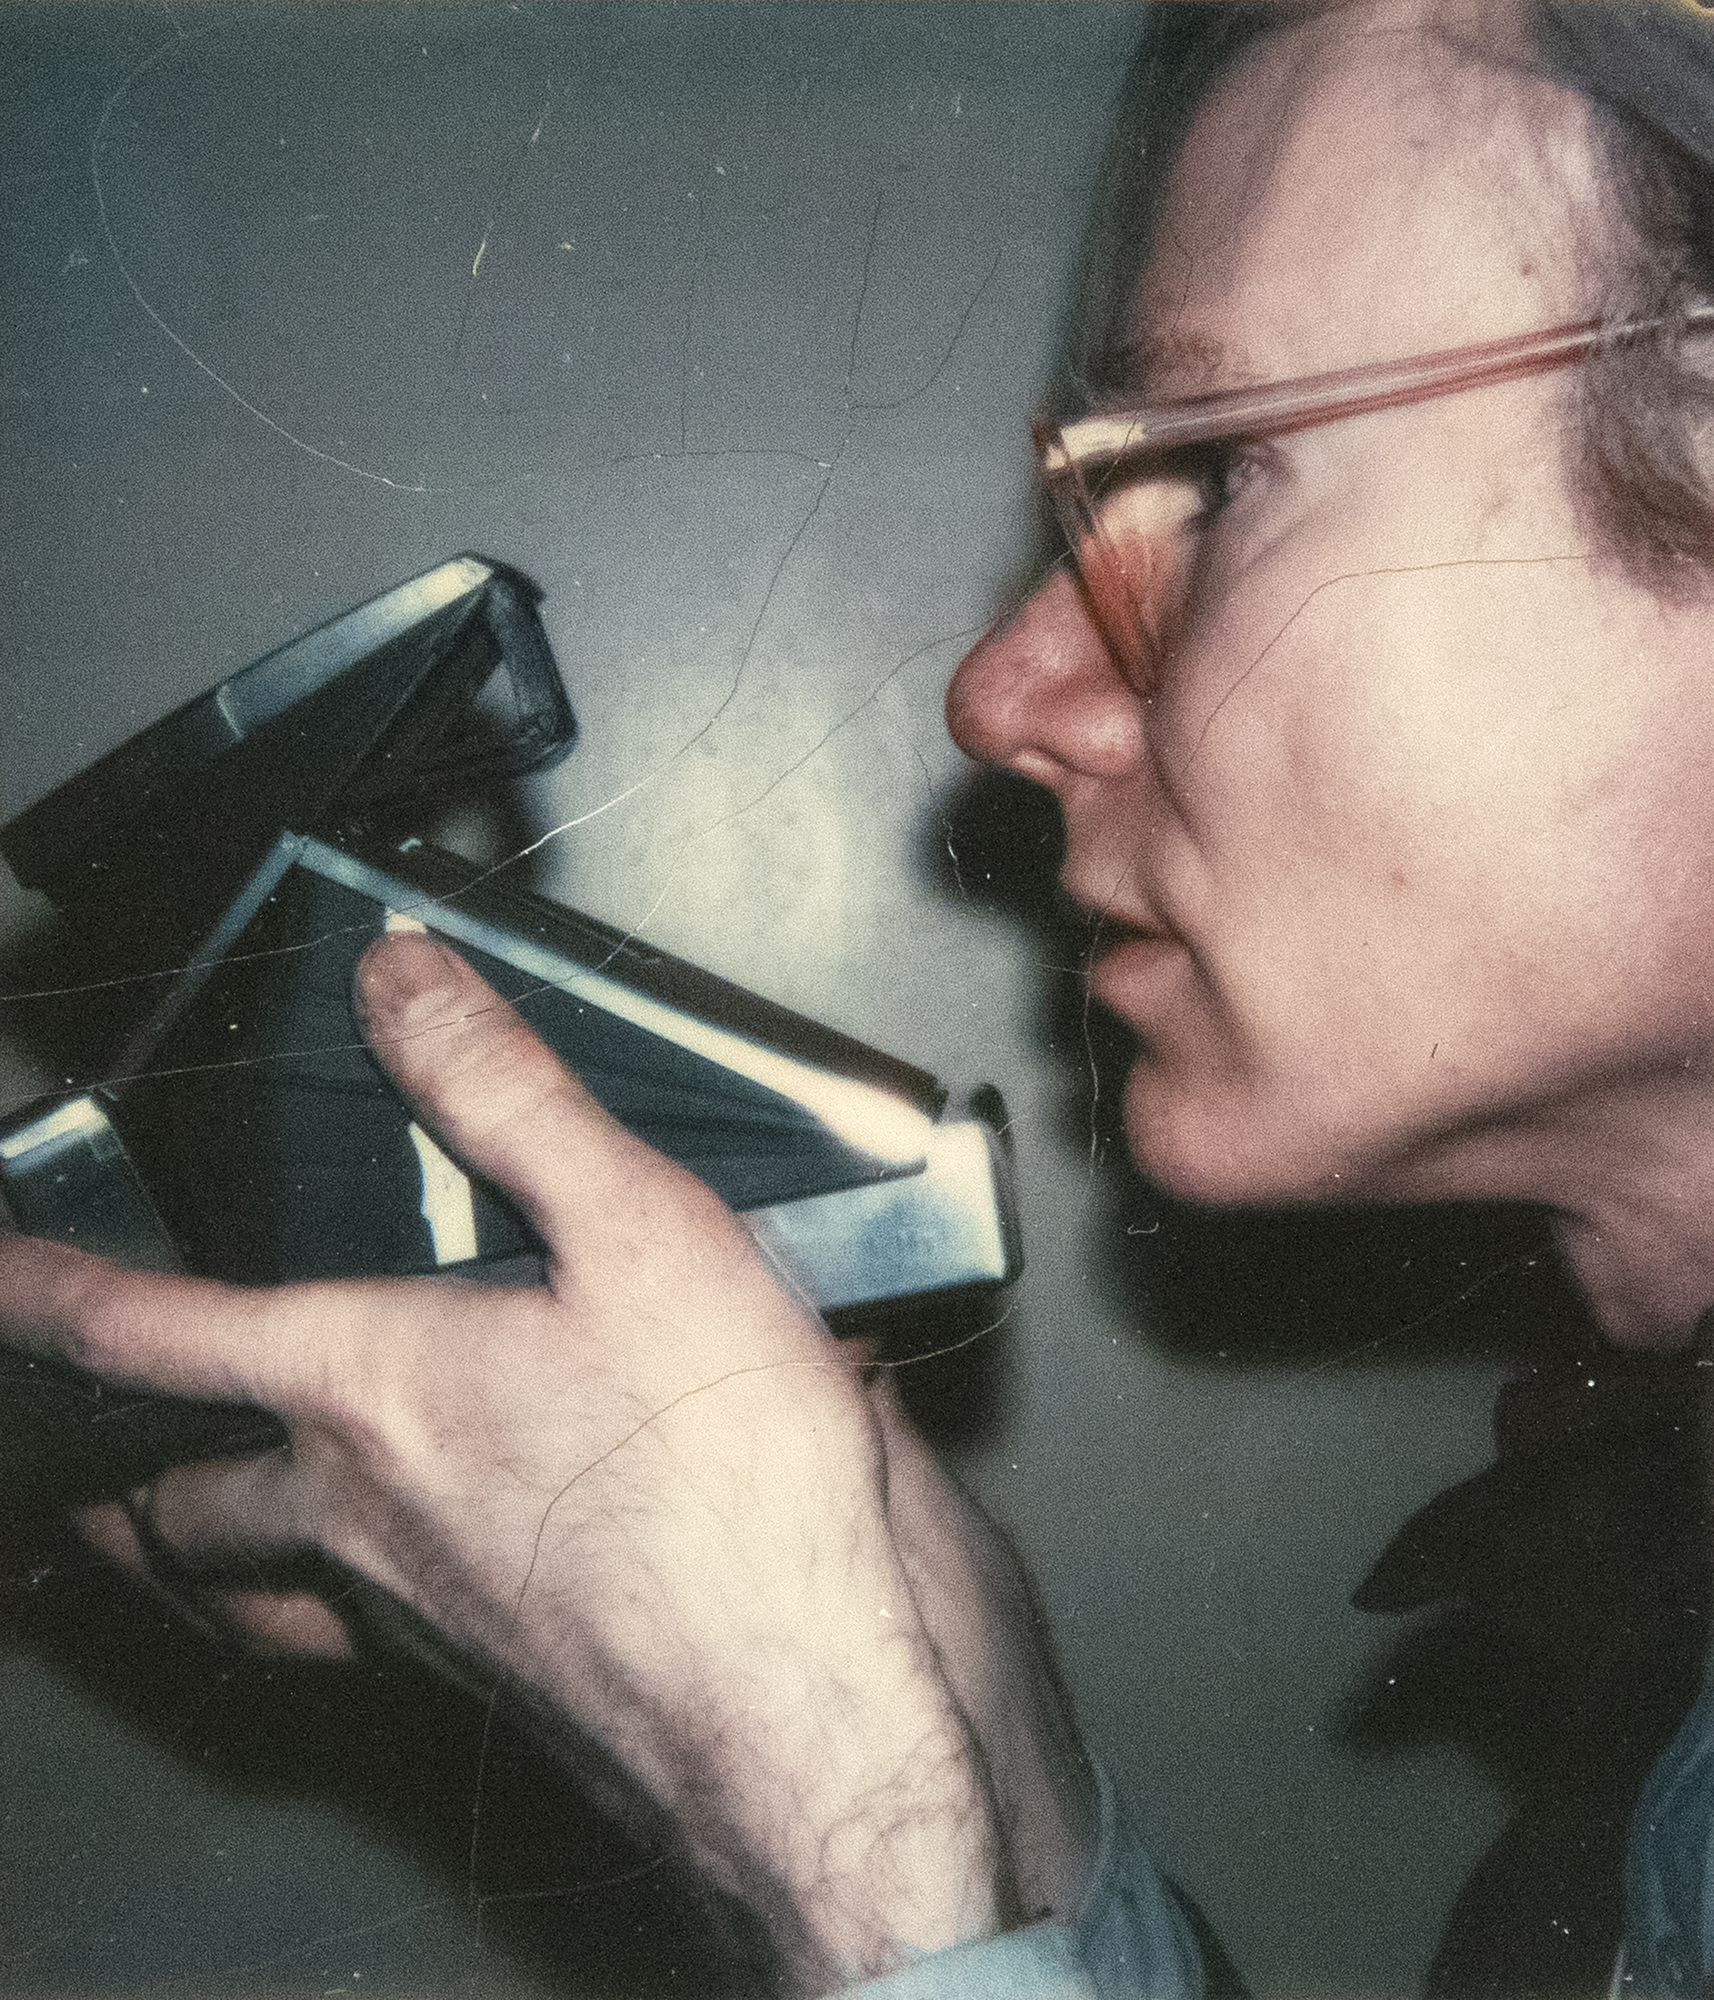 Andy Warhol carried a Polaroid camera as a relentless chronicler of life and its encounters from the late 1950s until he died in 1987. The vast collection of Polaroids he amassed are spontaneous, unpolished, often raw, and serve as a chronicle of his time, similar to how Instagram reflects our current era. Another person could have taken this self-portrait, creating a thinly veiled proposition asking the viewer to accept it as a self-portrait, or perhaps it was achieved solely by Warhol using an external self-timer accessory. It is a portrait that celebrates the device upon which Warhol's life essentially turned, a carefully staged homage to his relationship with the Polaroid camera.